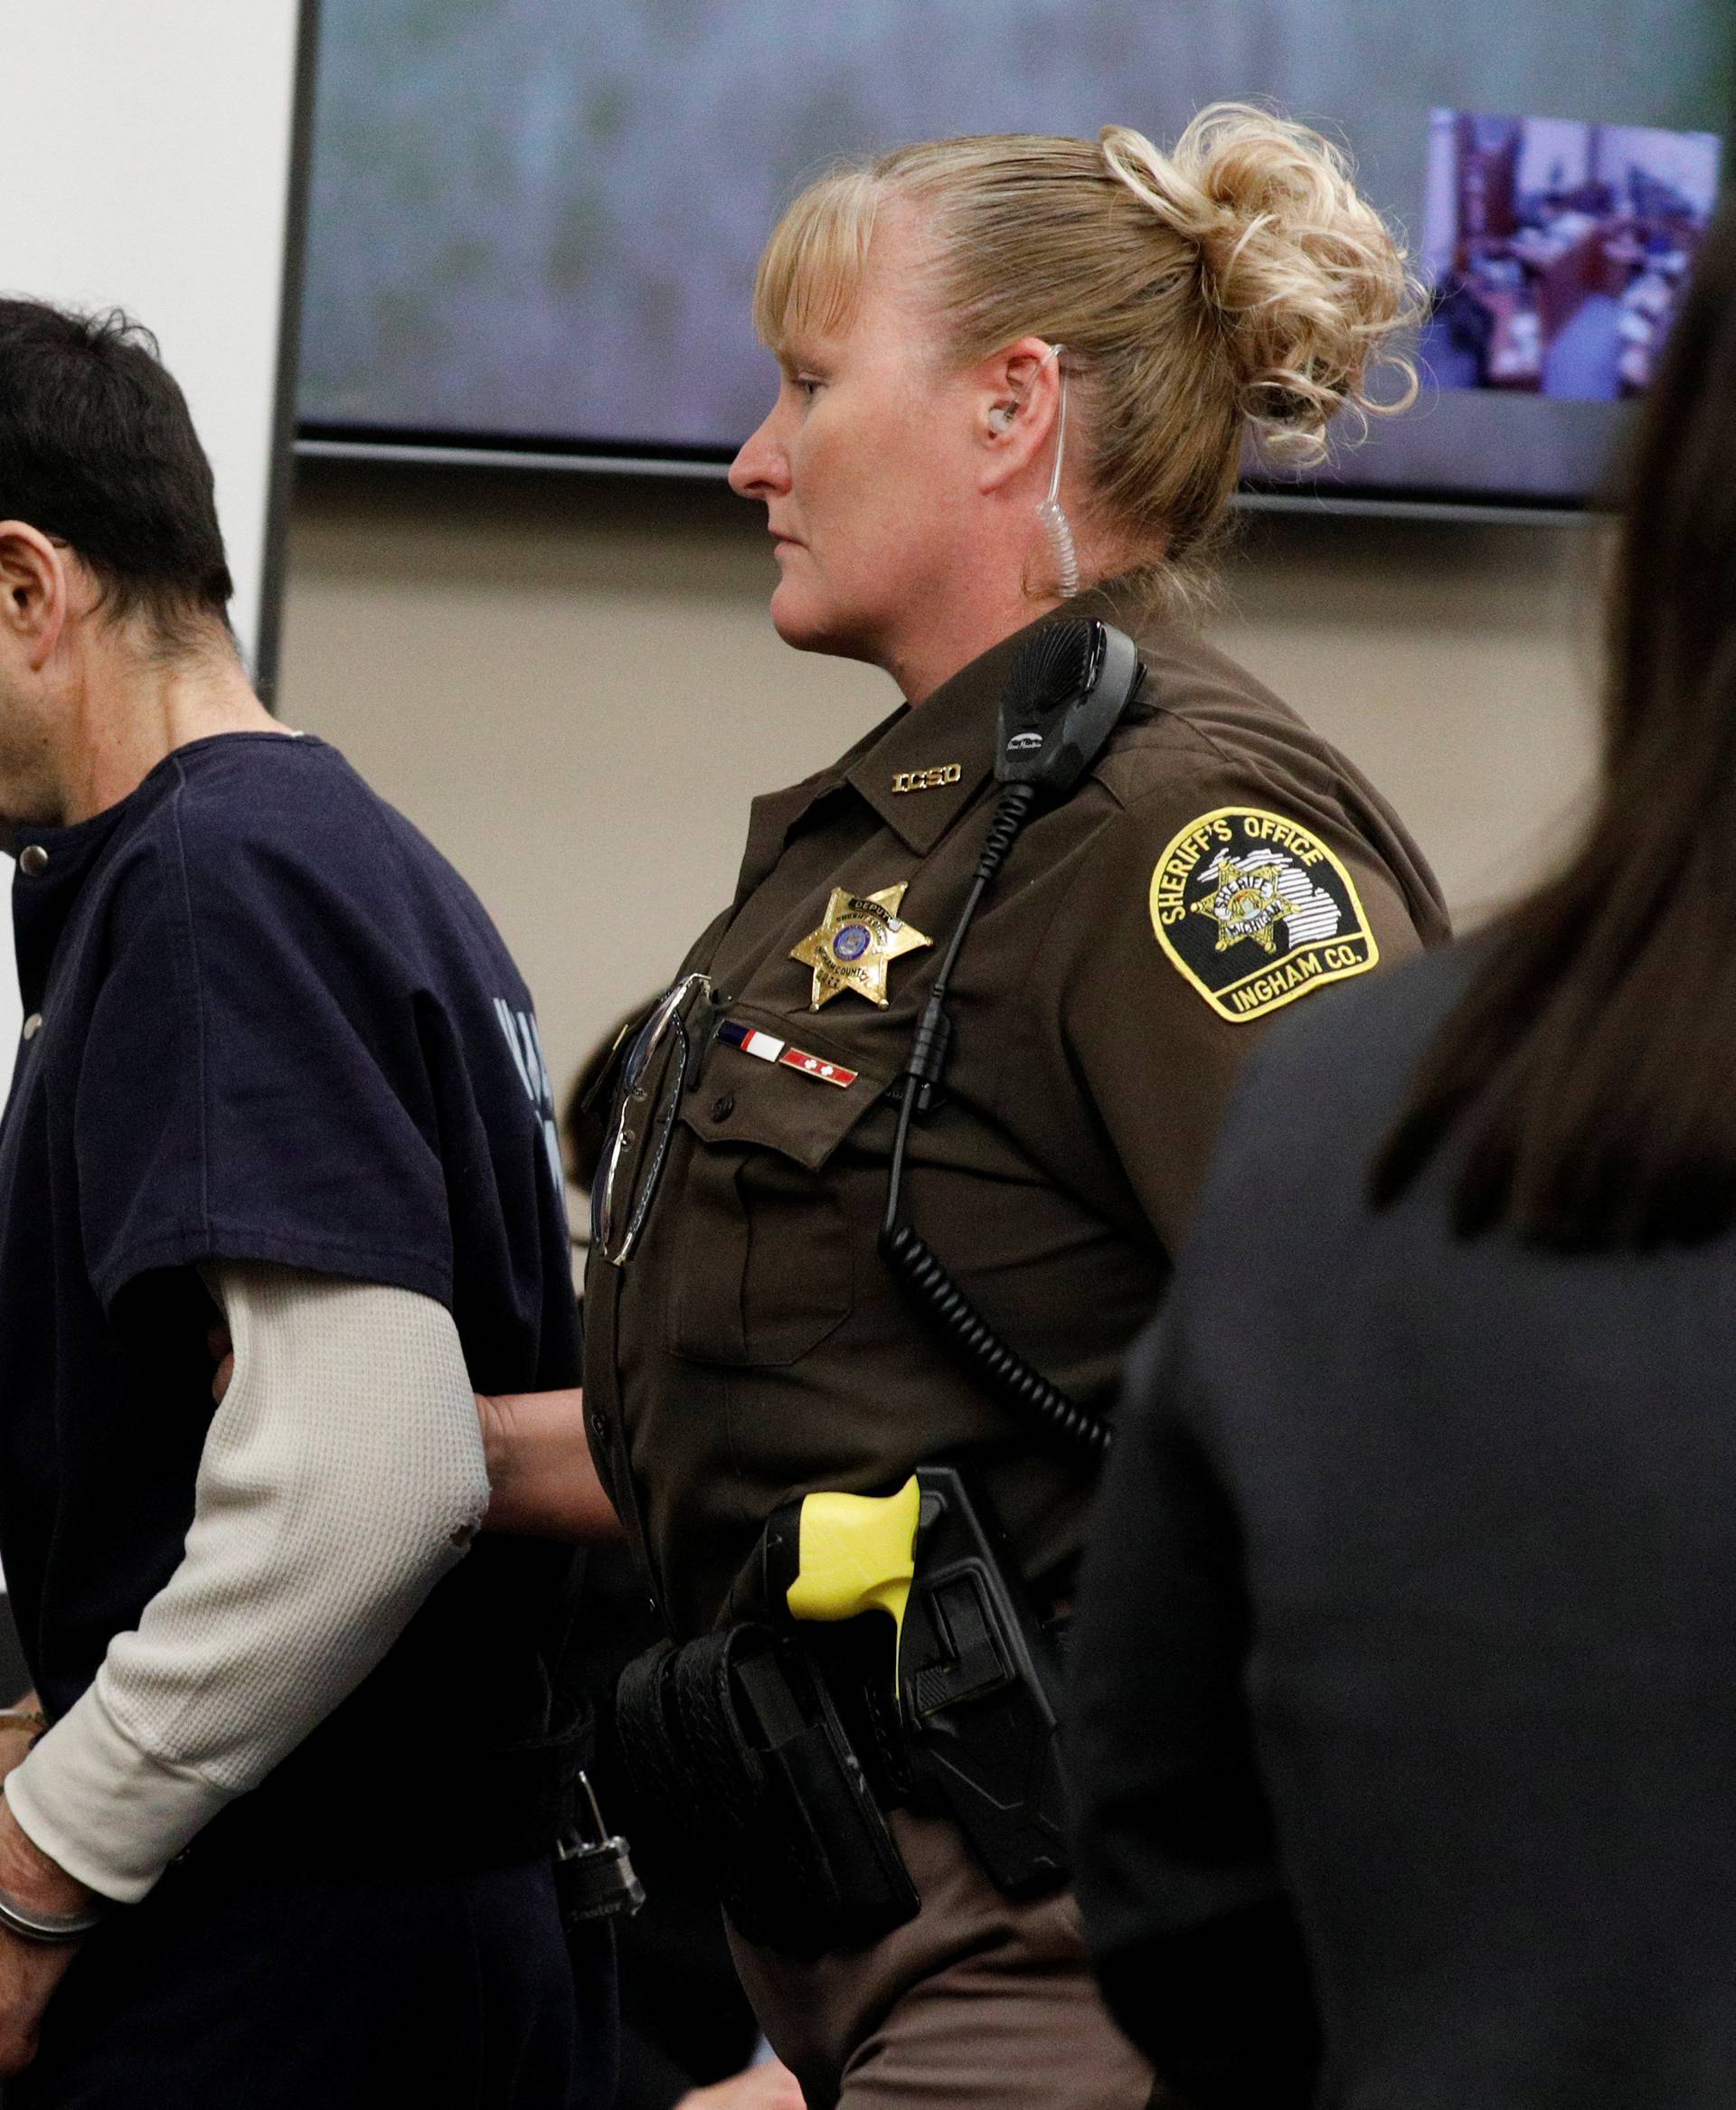 Larry Nassar, a former team USA Gymnastics doctor, who pleaded guilty in November 2017 to sexual assault charges, is escorted into the courtroom during his sentencing hearing in Lansing, Michigan